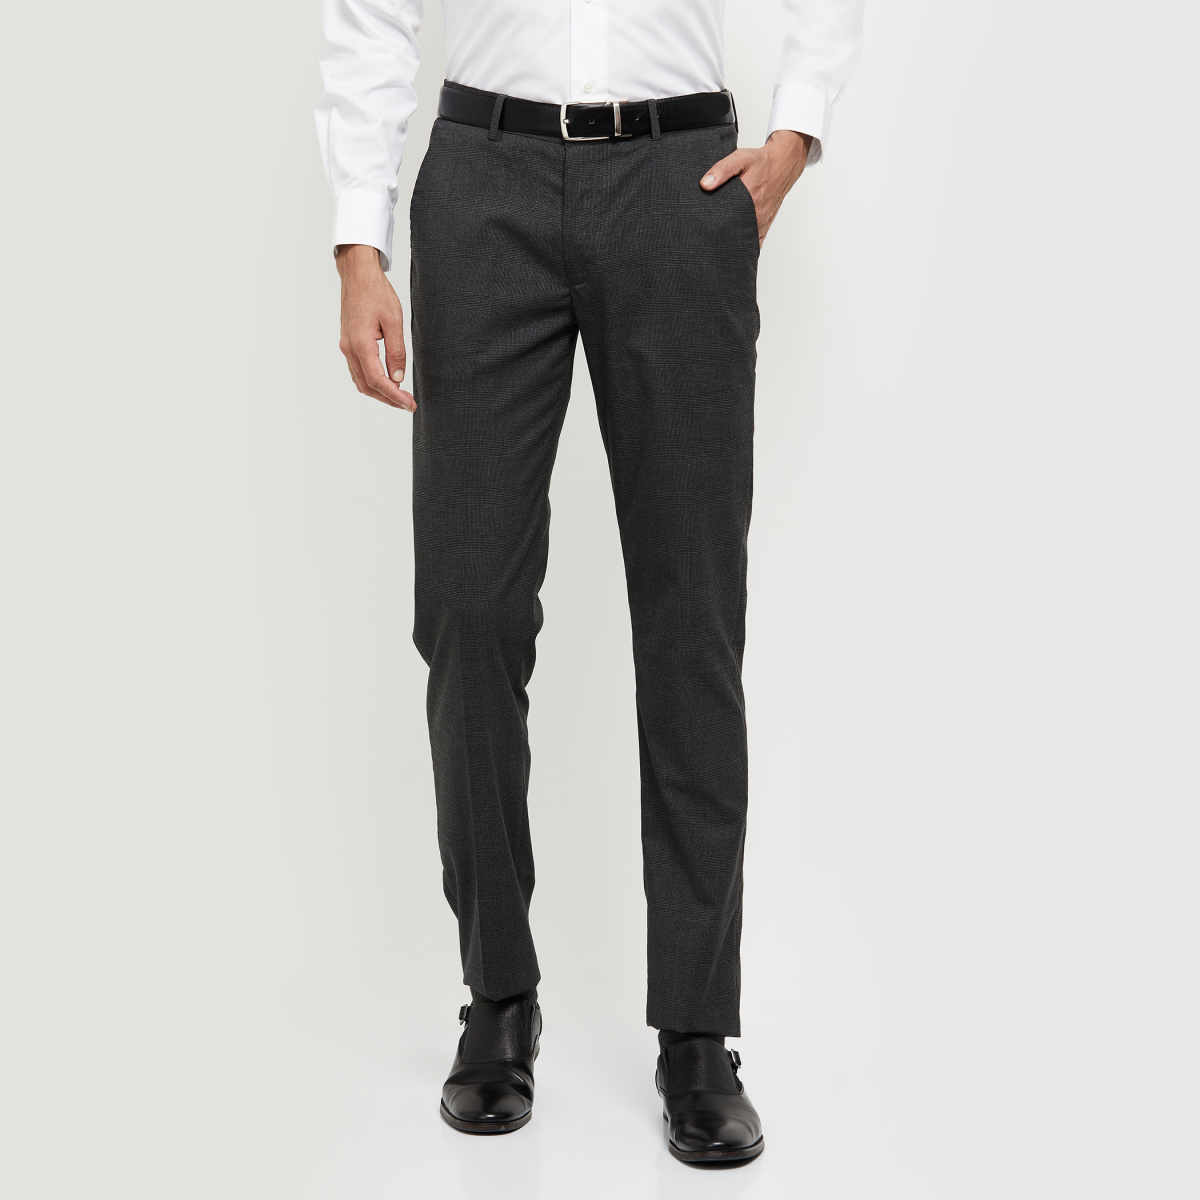 MAX Textured Slim Fit Woven Formal Trousers